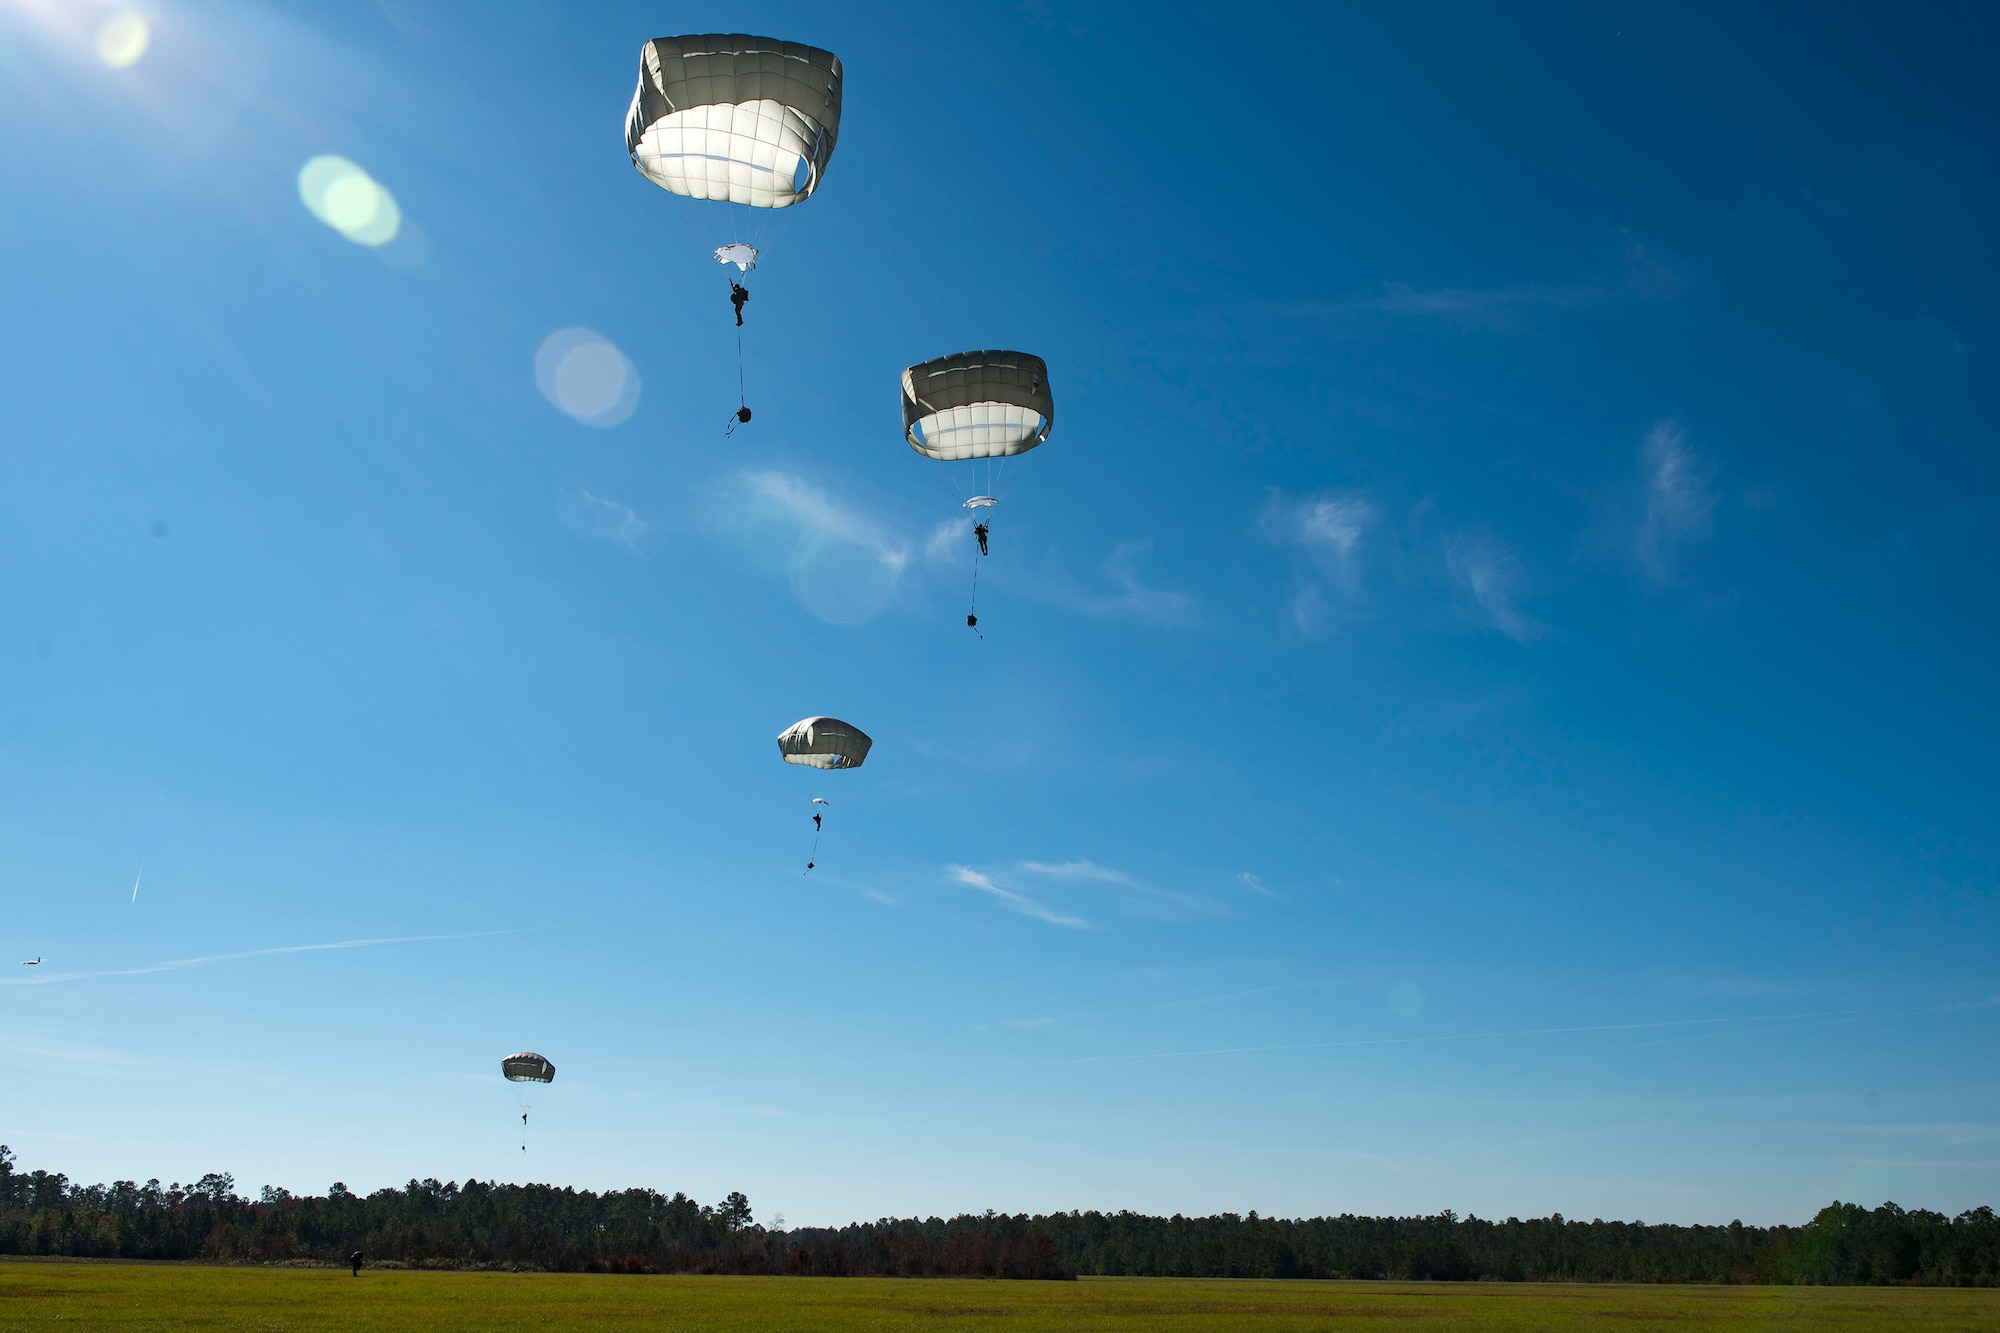 Airmen from the 93d Air Ground Operations Wing parachute down during static-line jump training, Nov. 21, 2018, at Moody Air Force Base, Ga. The overall objective of the training was to increase jumpers’ skills, knowledge and proficiency in regards to airborne operations. During a static-line jump, the jumper is attached to the aircraft via the ‘static-line’, which automatically deploys the jumpers’ parachute after they’ve exited the aircraft. (U.S. Air Force photo by Airman 1st Class Erick Requadt)